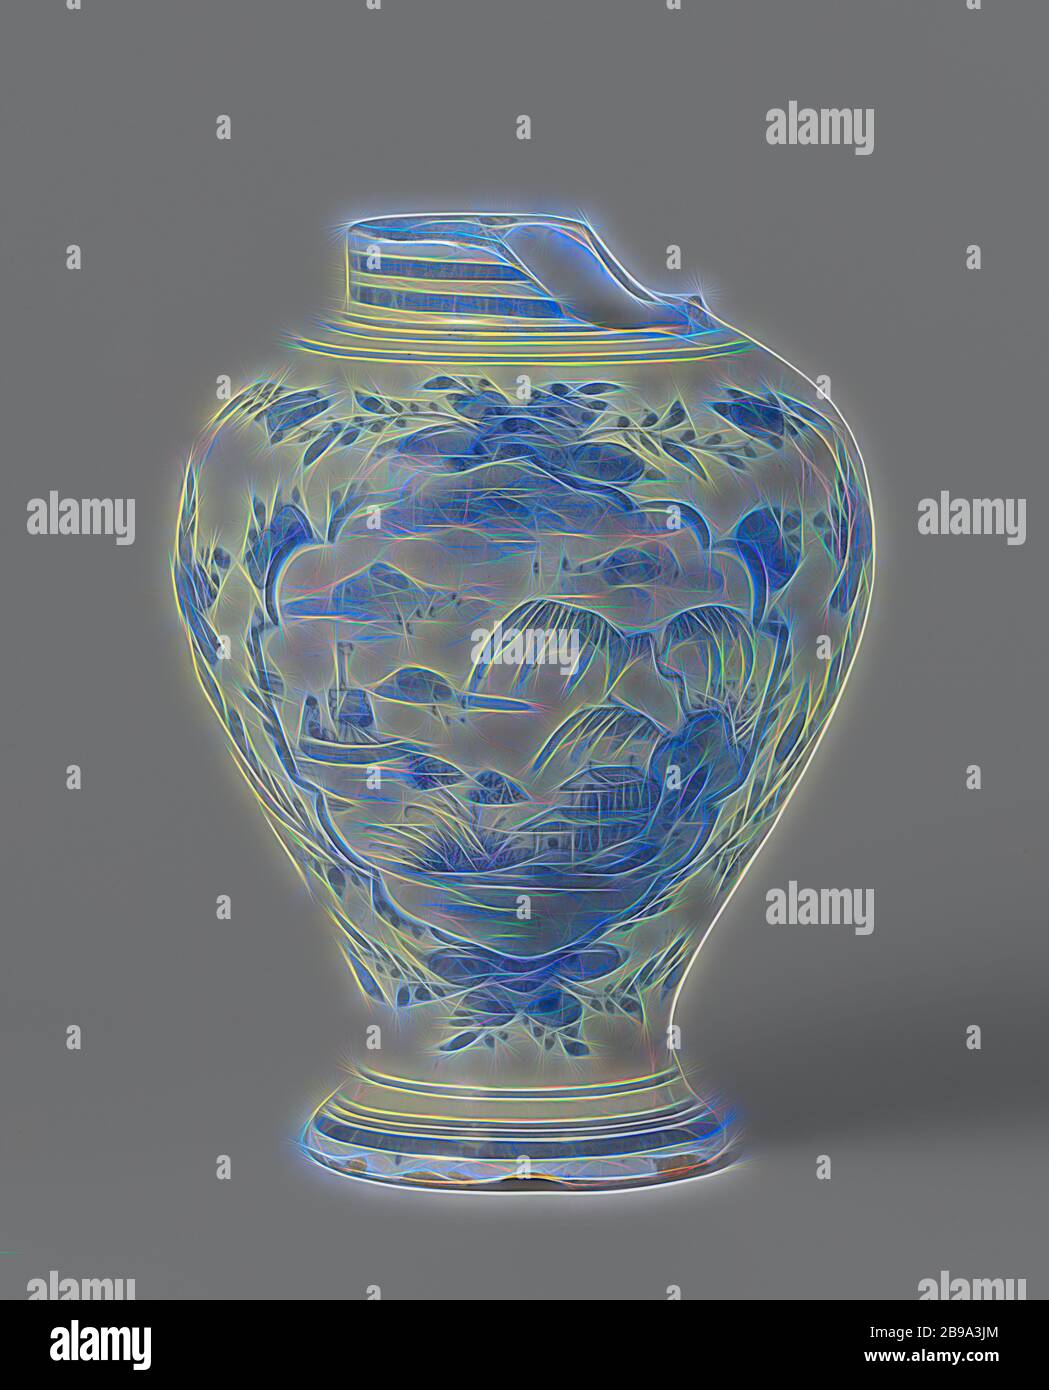 Vase, Vase of faience, painted in blue in the glaze with a landscape after Chinese example., anonymous, Delft, c. 1760 - c. 1800, h 19 cm × d 14 cm, Reimagined by Gibon, design of warm cheerful glowing of brightness and light rays radiance. Classic art reinvented with a modern twist. Photography inspired by futurism, embracing dynamic energy of modern technology, movement, speed and revolutionize culture. Stock Photo